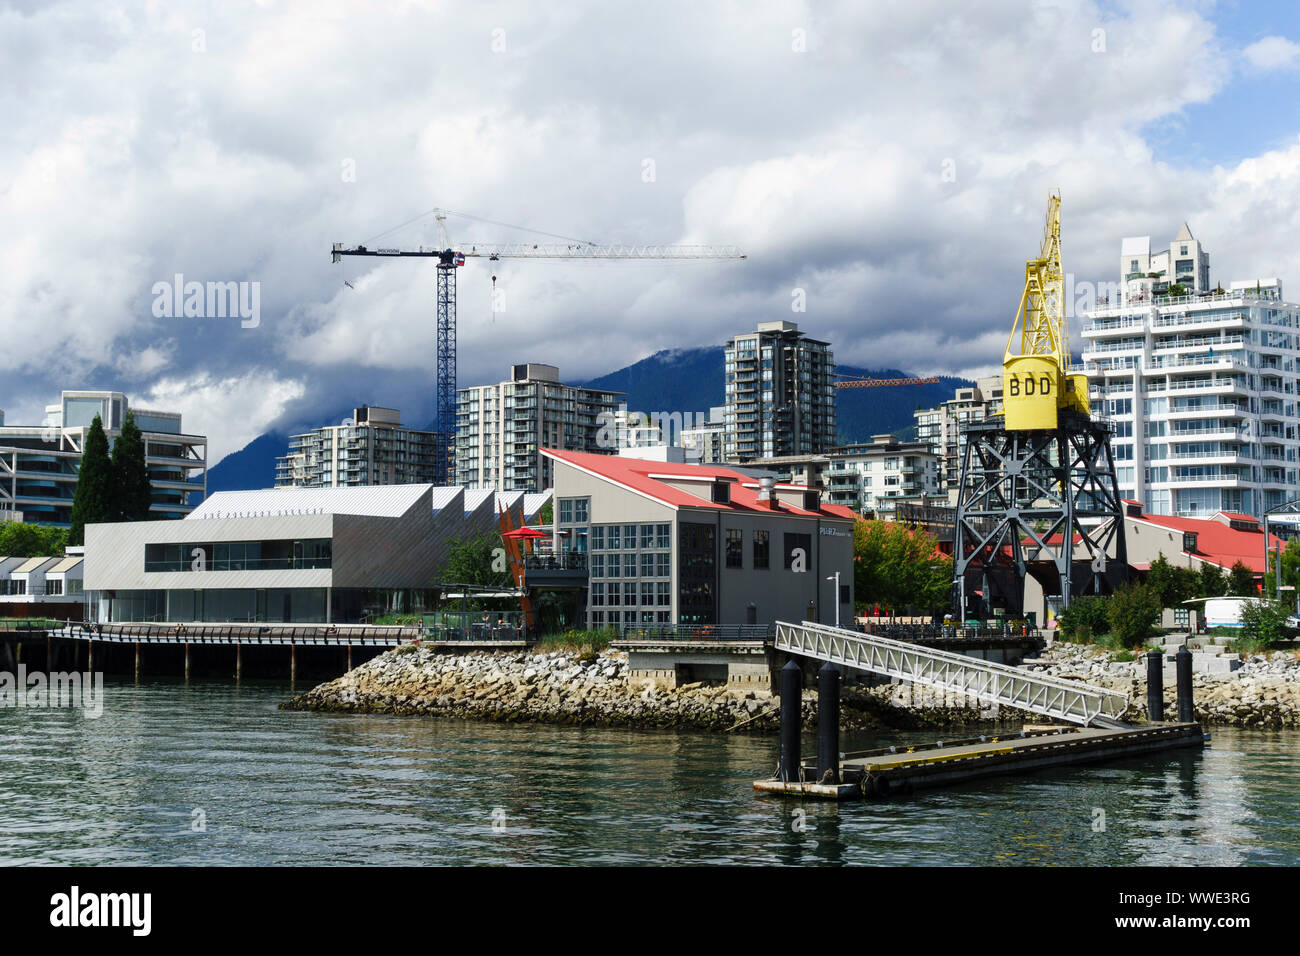 Lonsdale waterfront with Polygon Gallery, Pier 7 restaurant and historic crane. North Vancouver, British Columbia, Canada. Stock Photo